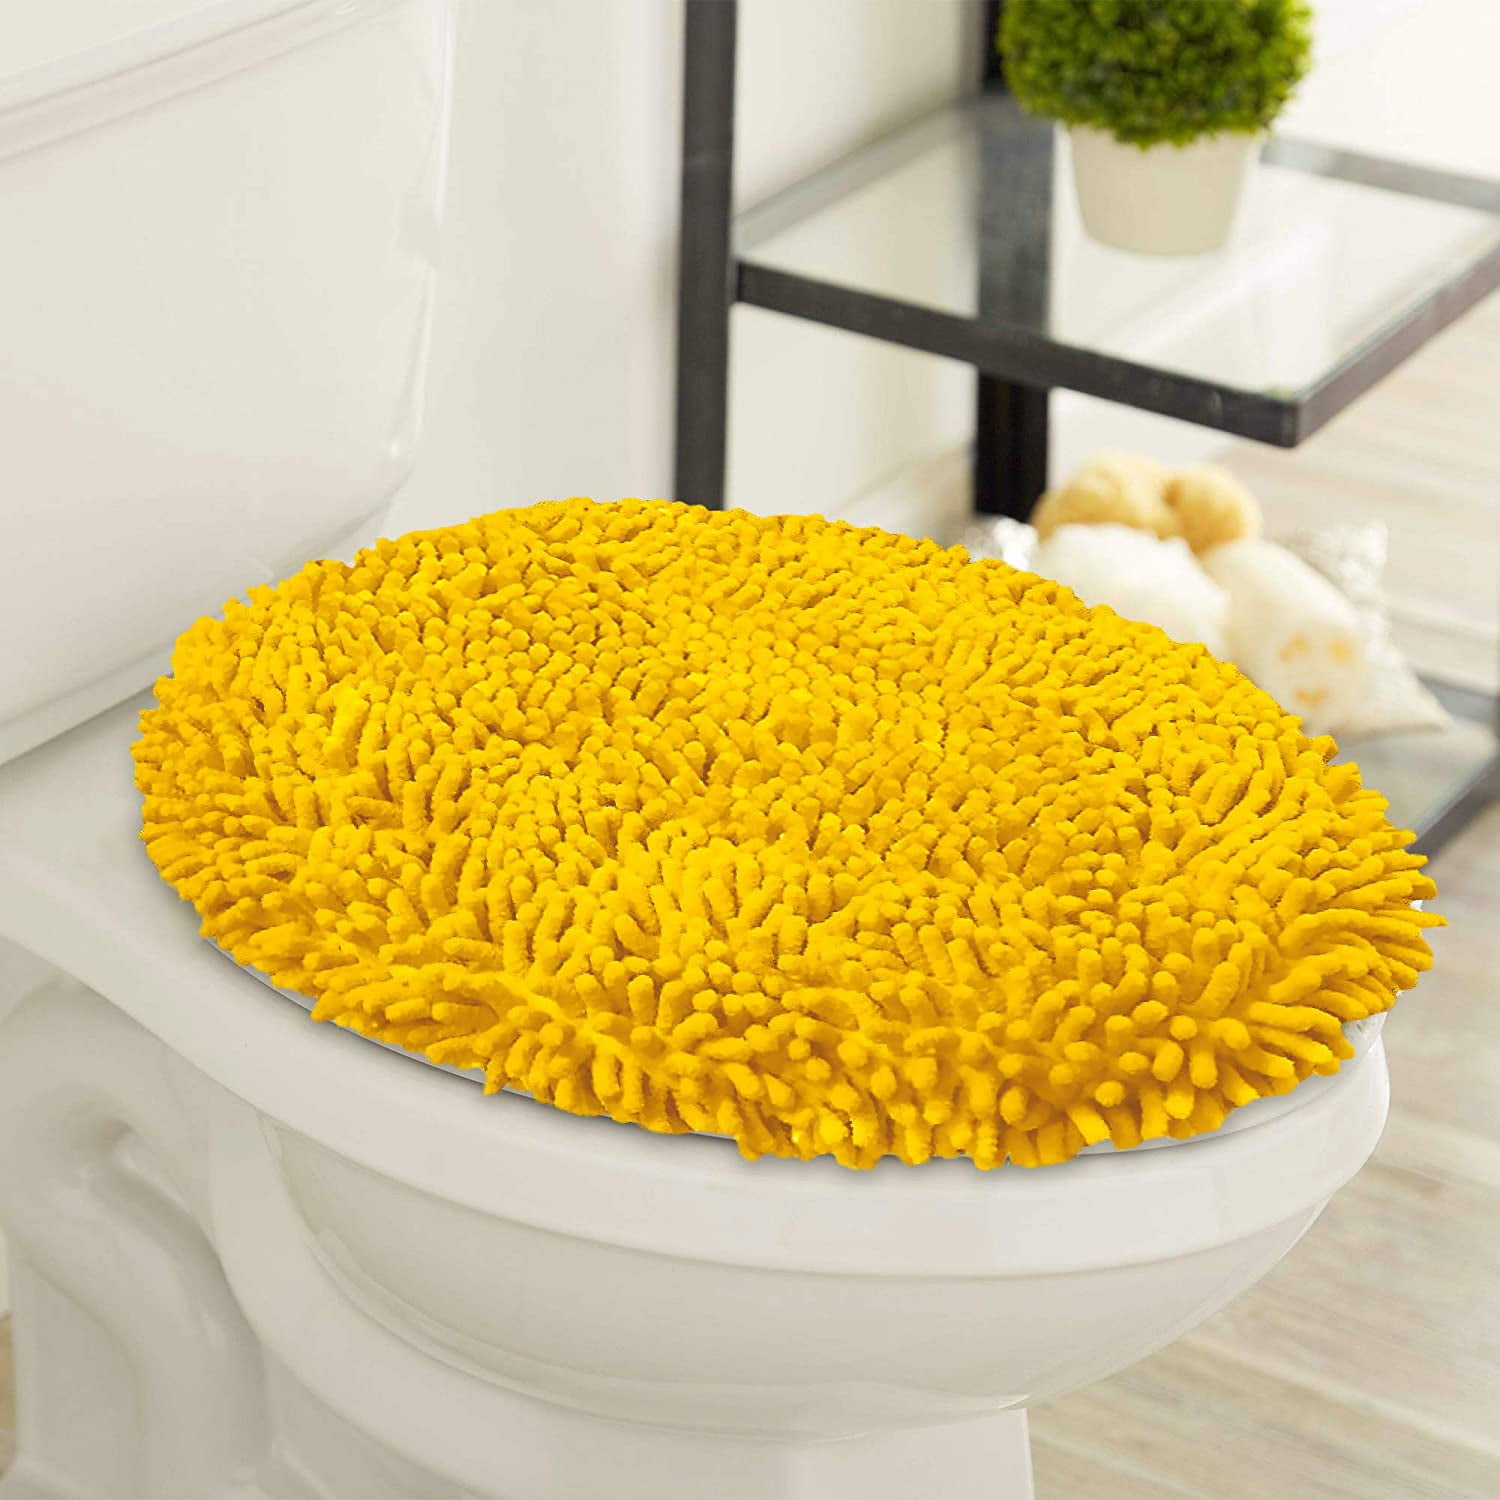 Extra-Soft Plush Seat Cloud Washable Shaggy Microfiber Standard Toilet Lid Covers for Bathroom Machine Wash & Dry. Round Lid Cover, Green LuxUrux Toilet Lid Cover 